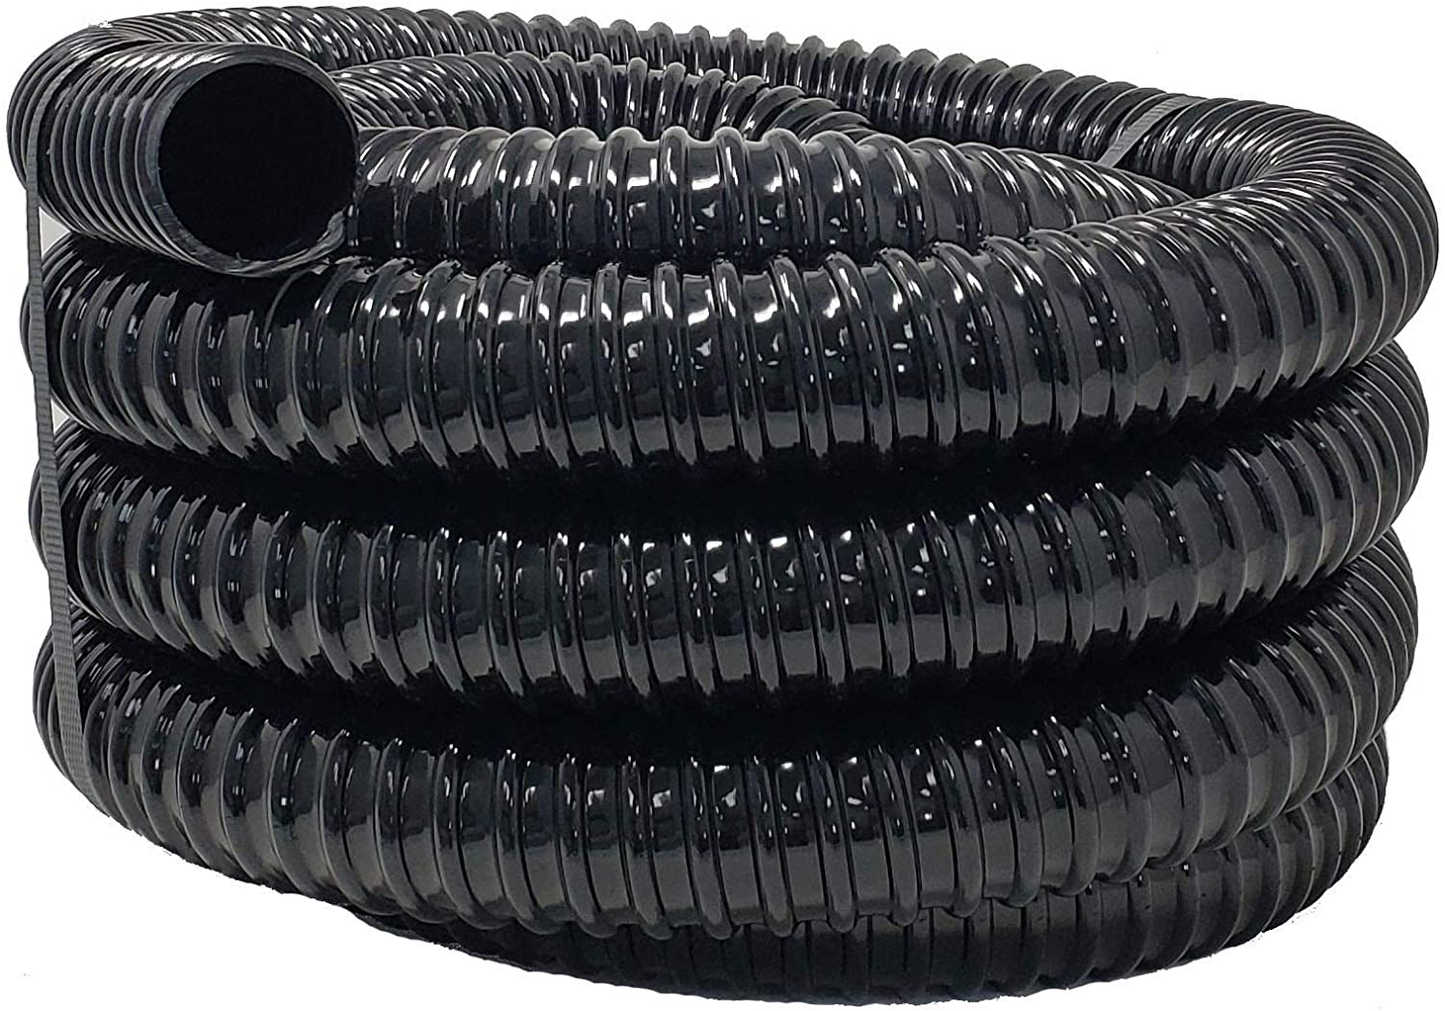 Sealproof Kinkproof 1-1/2" Dia Waterfall, Pond Tubing, 1-1/2-Inch ID, 20 FT, Black Corrugated PVC Strong Flexible Tubing Made in USA Animals & Pet Supplies > Pet Supplies > Fish Supplies > Aquarium & Pond Tubing Sealproof   